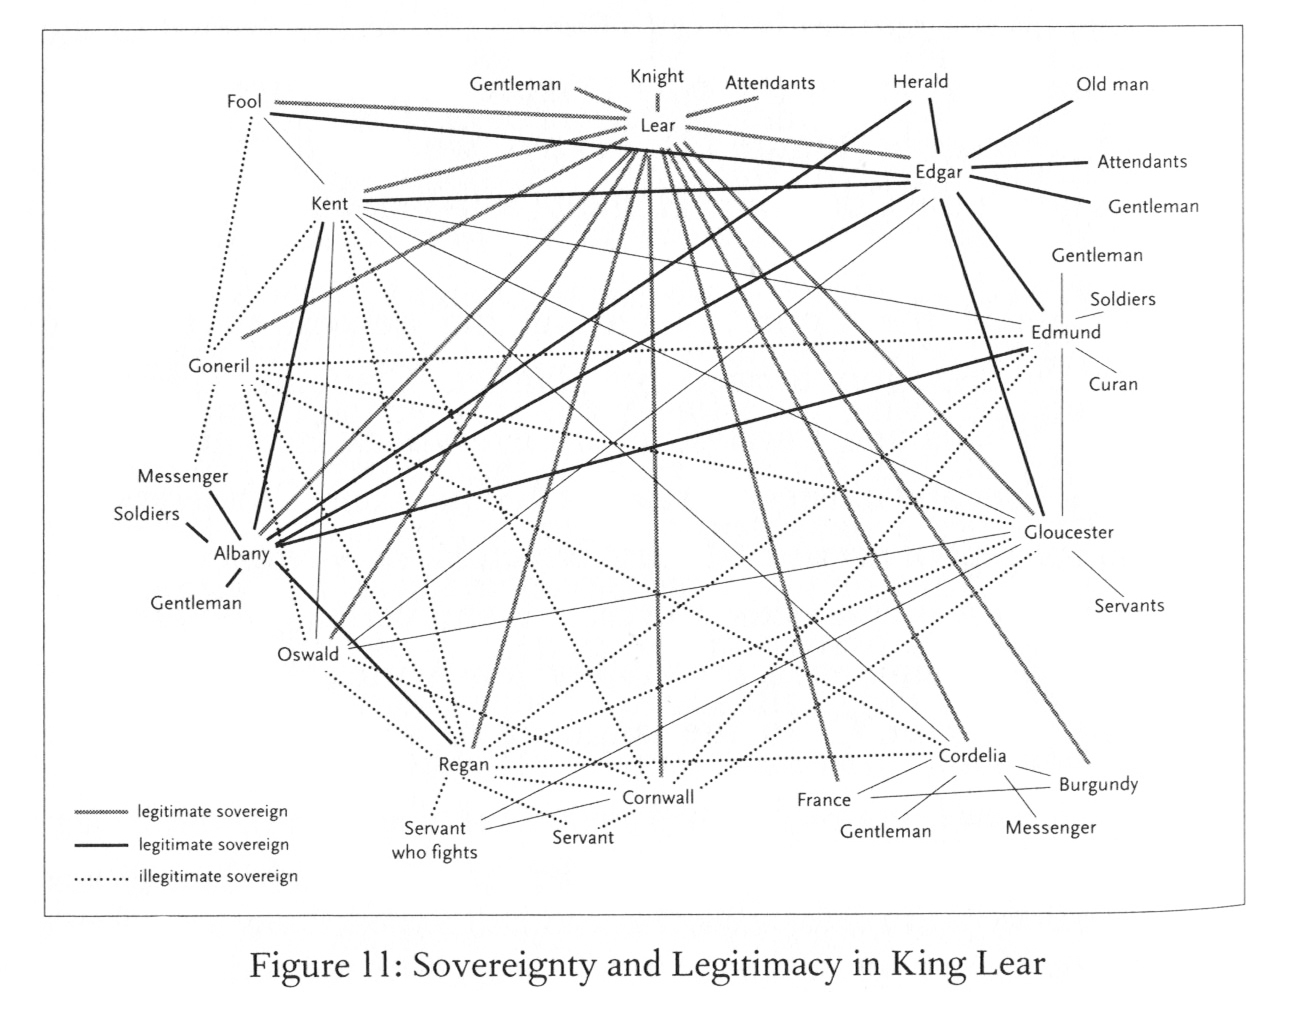 Franco Moretti - Sovereignty and Legitimacy in King Lear